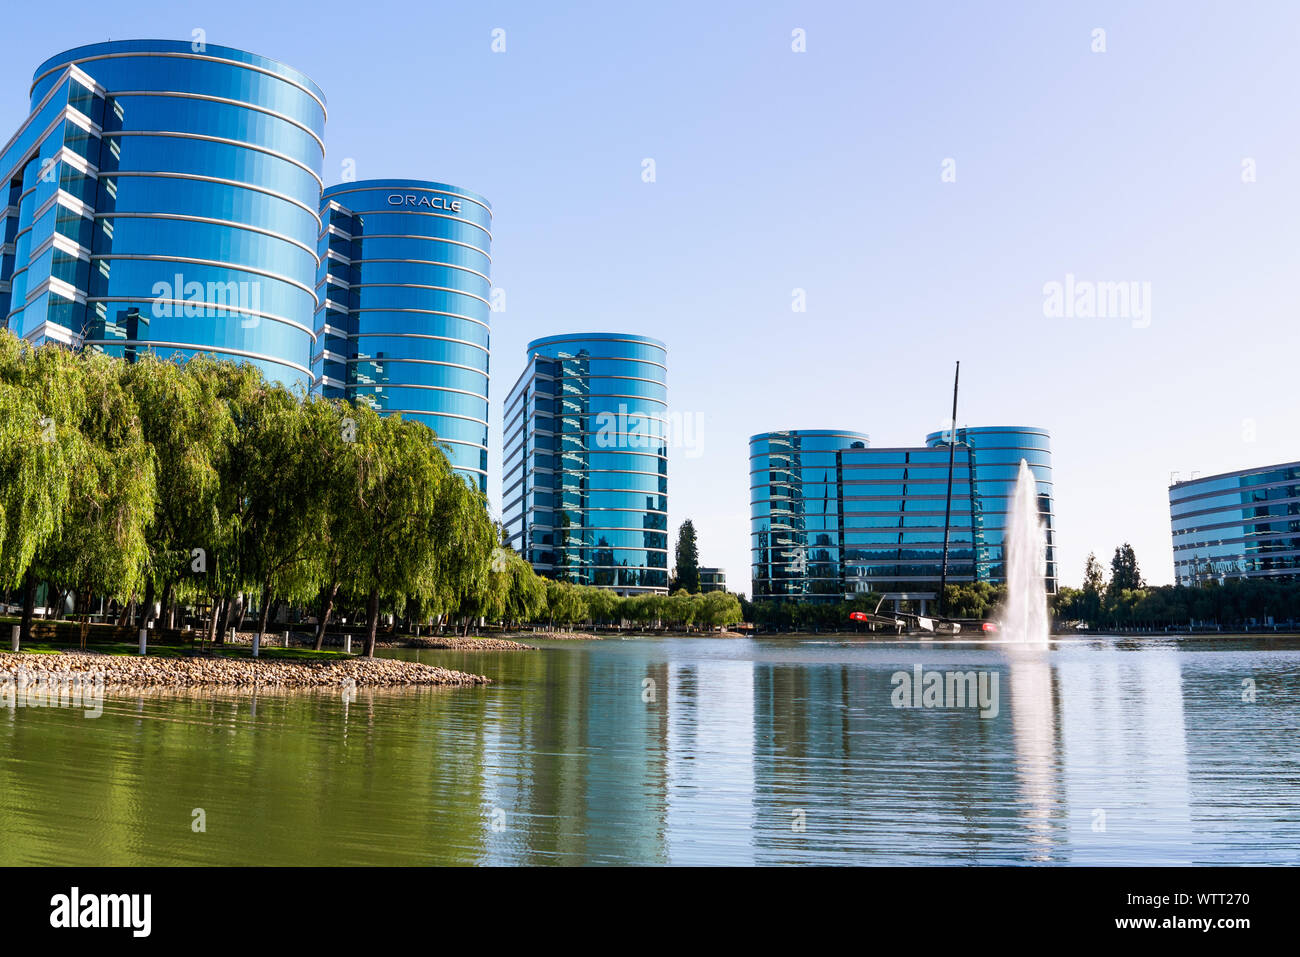 Sep 9, 2019 Redwood City / CA / USA -  Oracle corporate headquarters in Silicon Valley; Oracle Corporation is a multinational computer technology comp Stock Photo